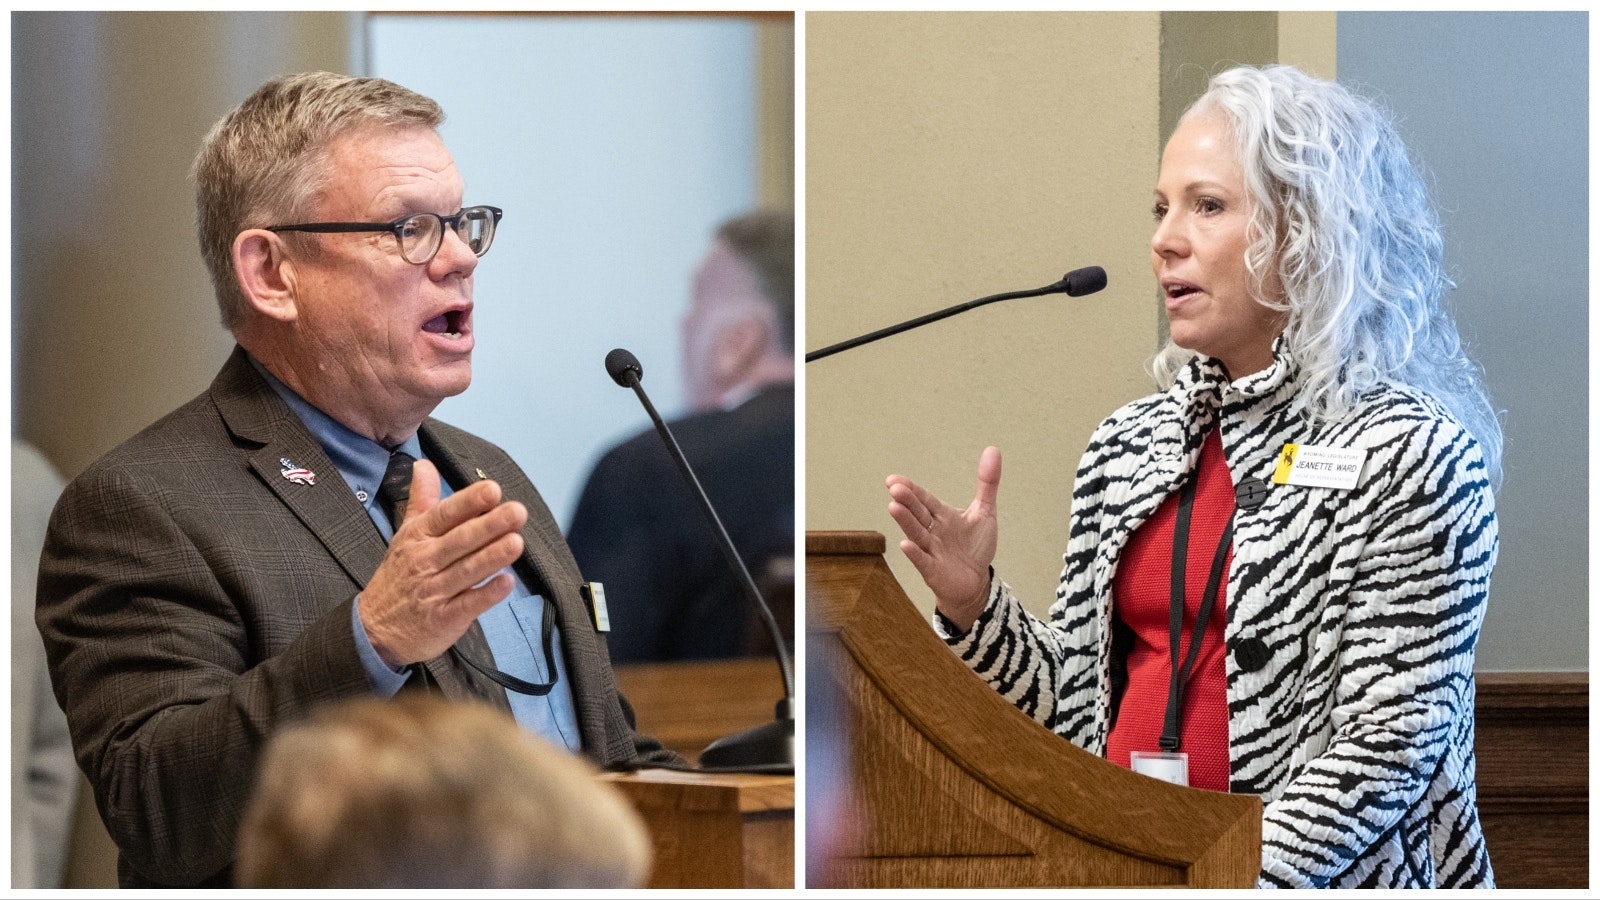 State Reps. Kevin O'Hearn and Jeannette Ward, both R-Casper, are on the Legislature's Joint Labor, Health and Social Services Committee.